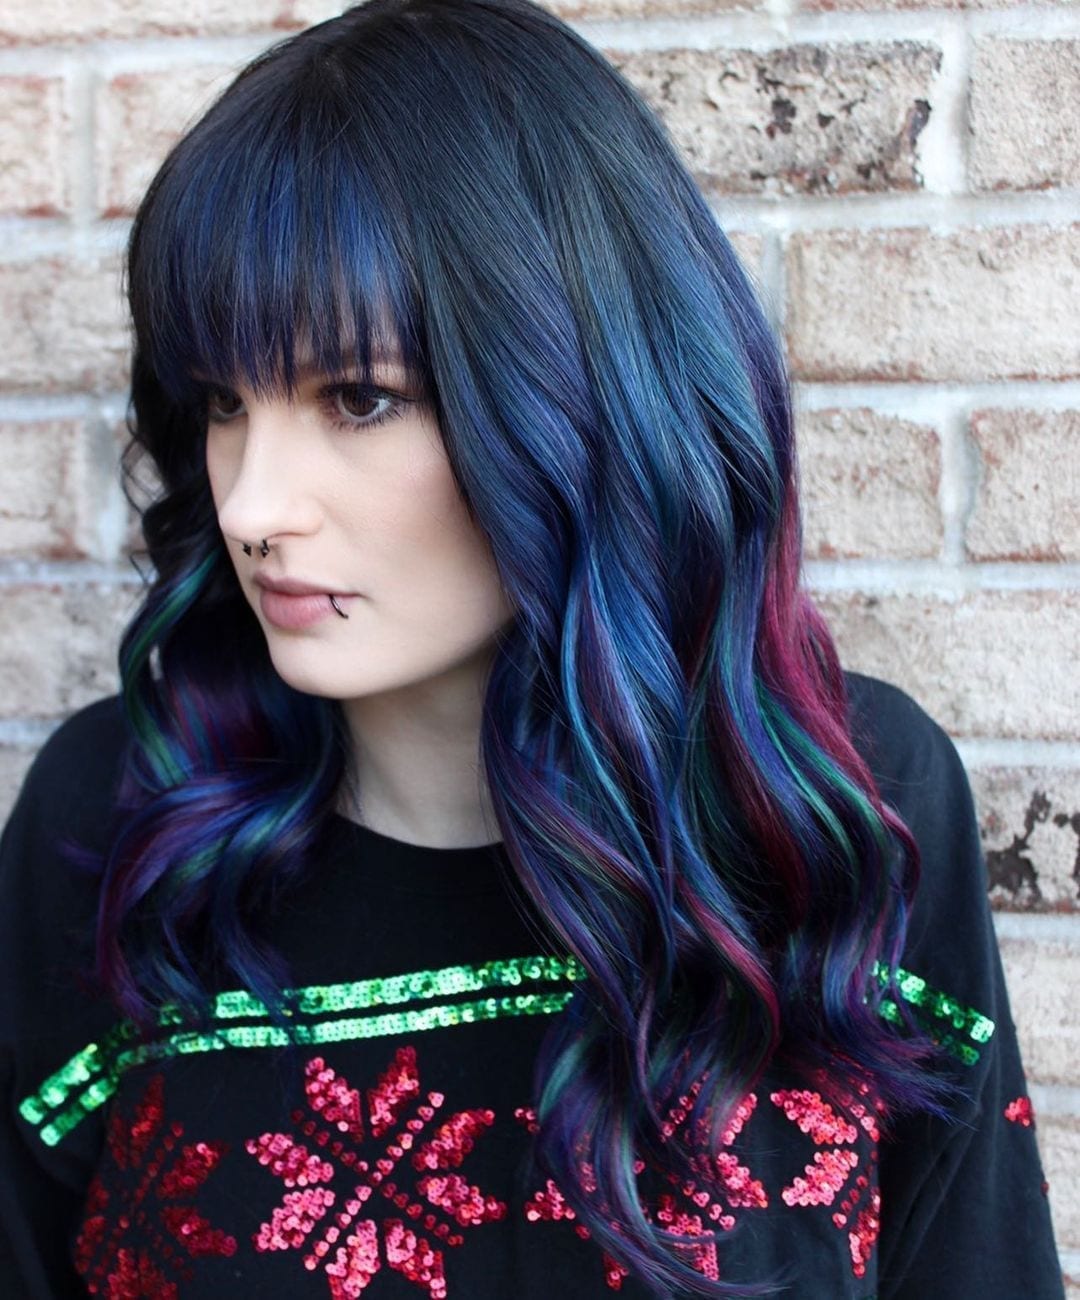 Pale woman with a lip ring and dark blue hair does not smile and wears and black and multi-colored sweater